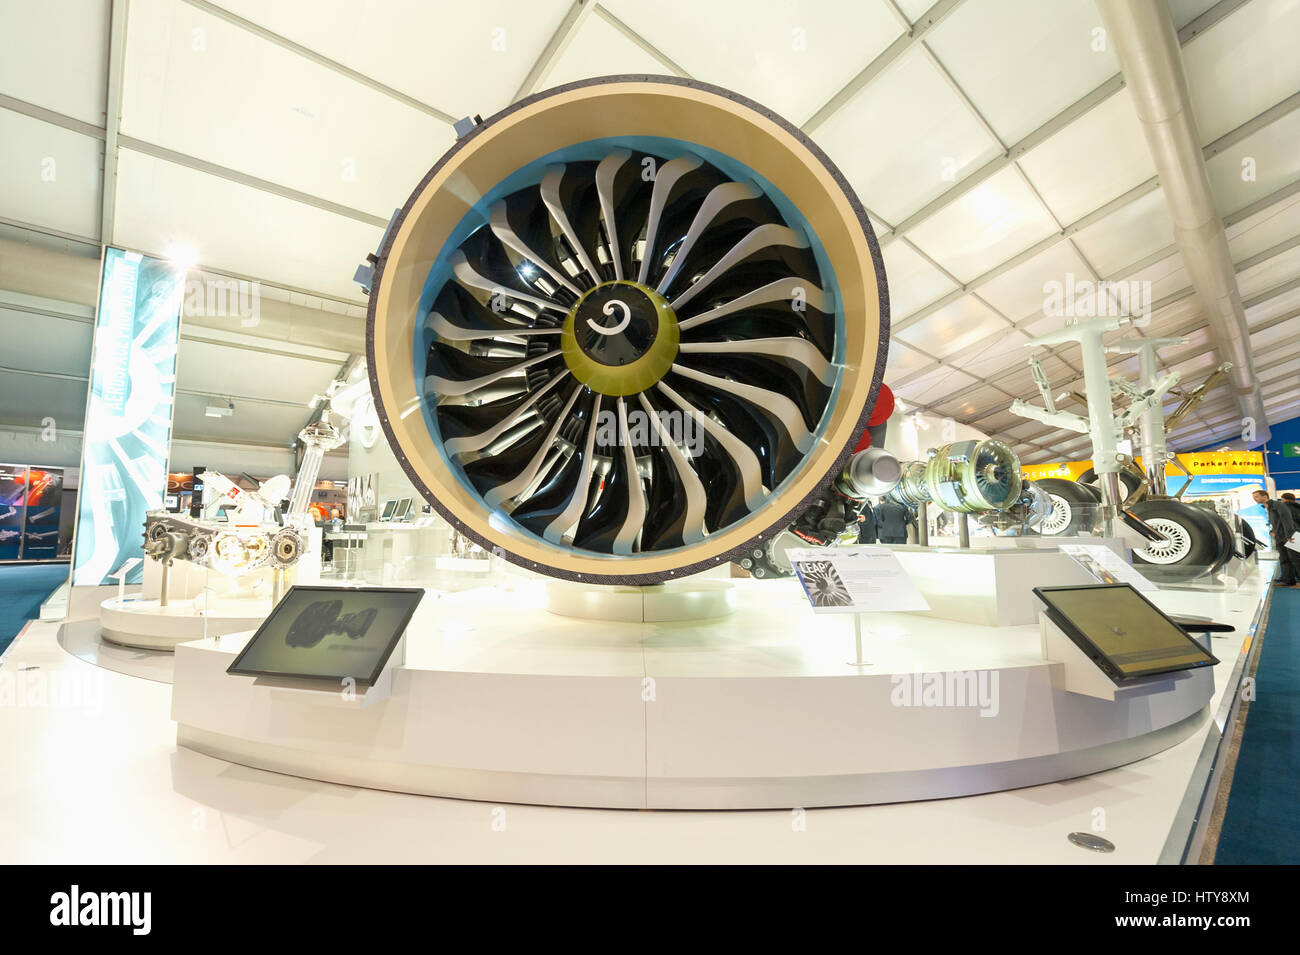 Exhibition stands displaying jet engines and other components used in the aviation industry at Farnborough, UK Stock Photo